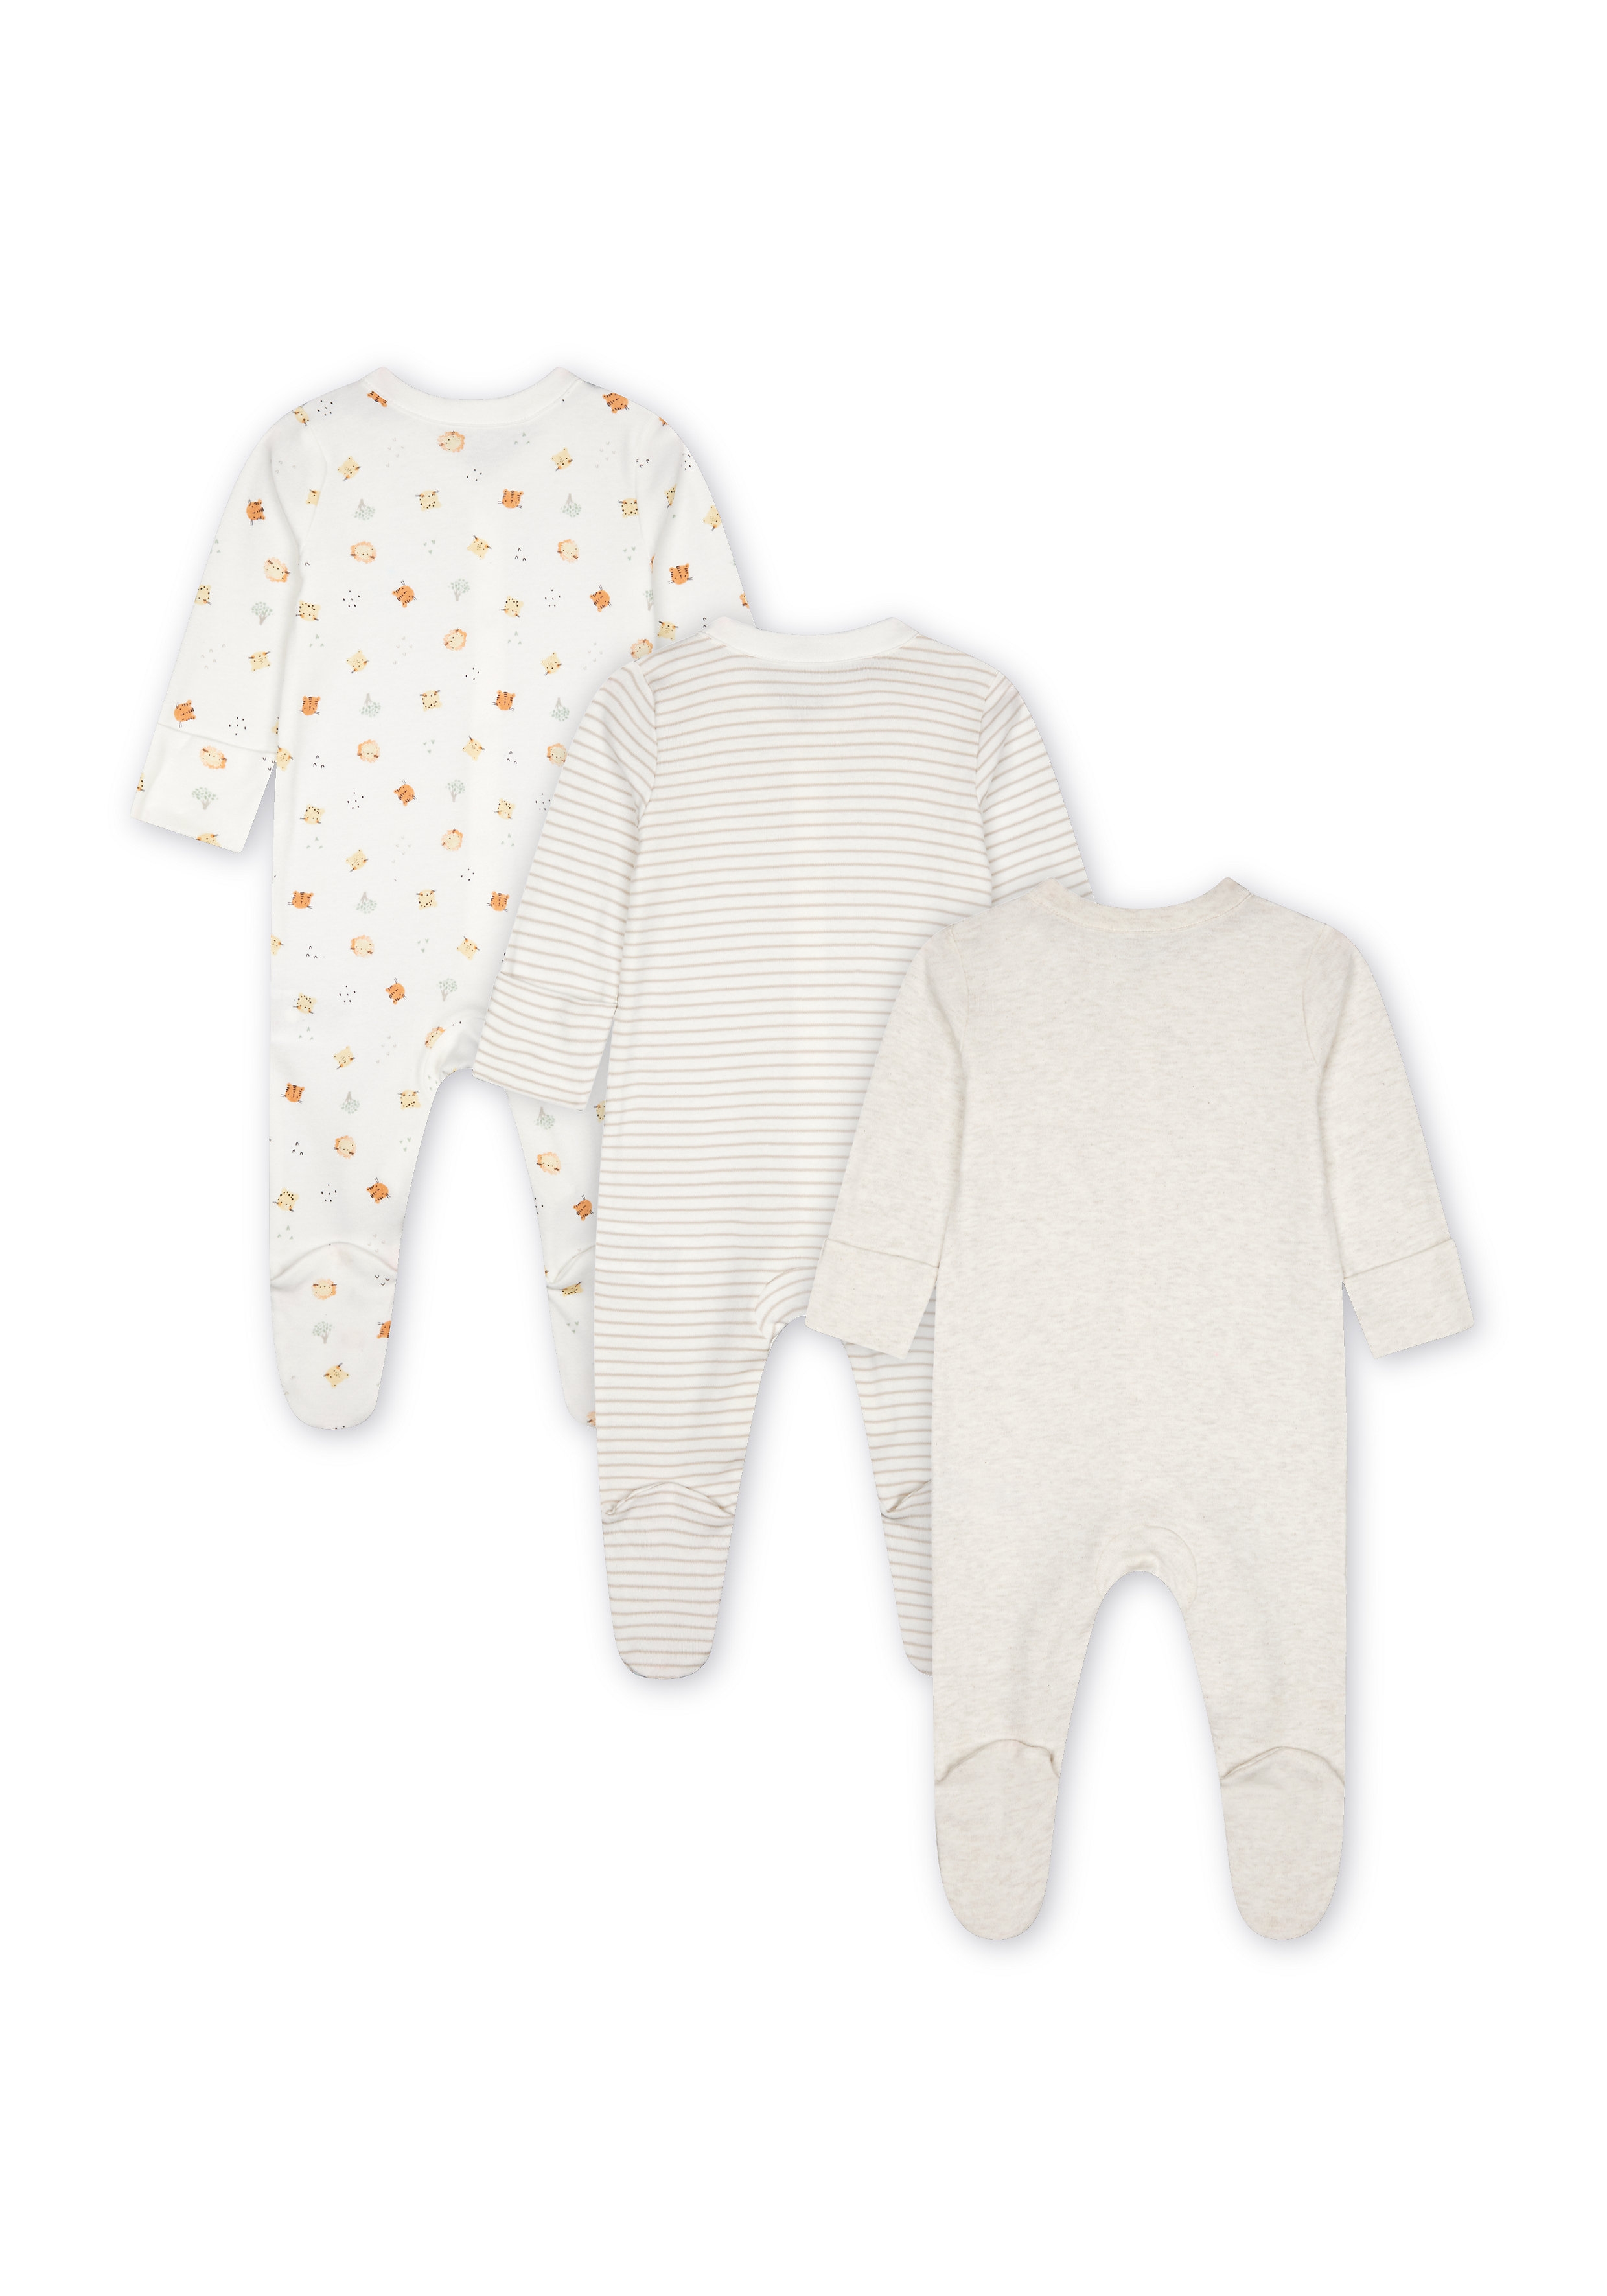 Mothercare | Unisex Sleepsuit Stripes And Animal Print  - Pack Of 3 - Cream 1